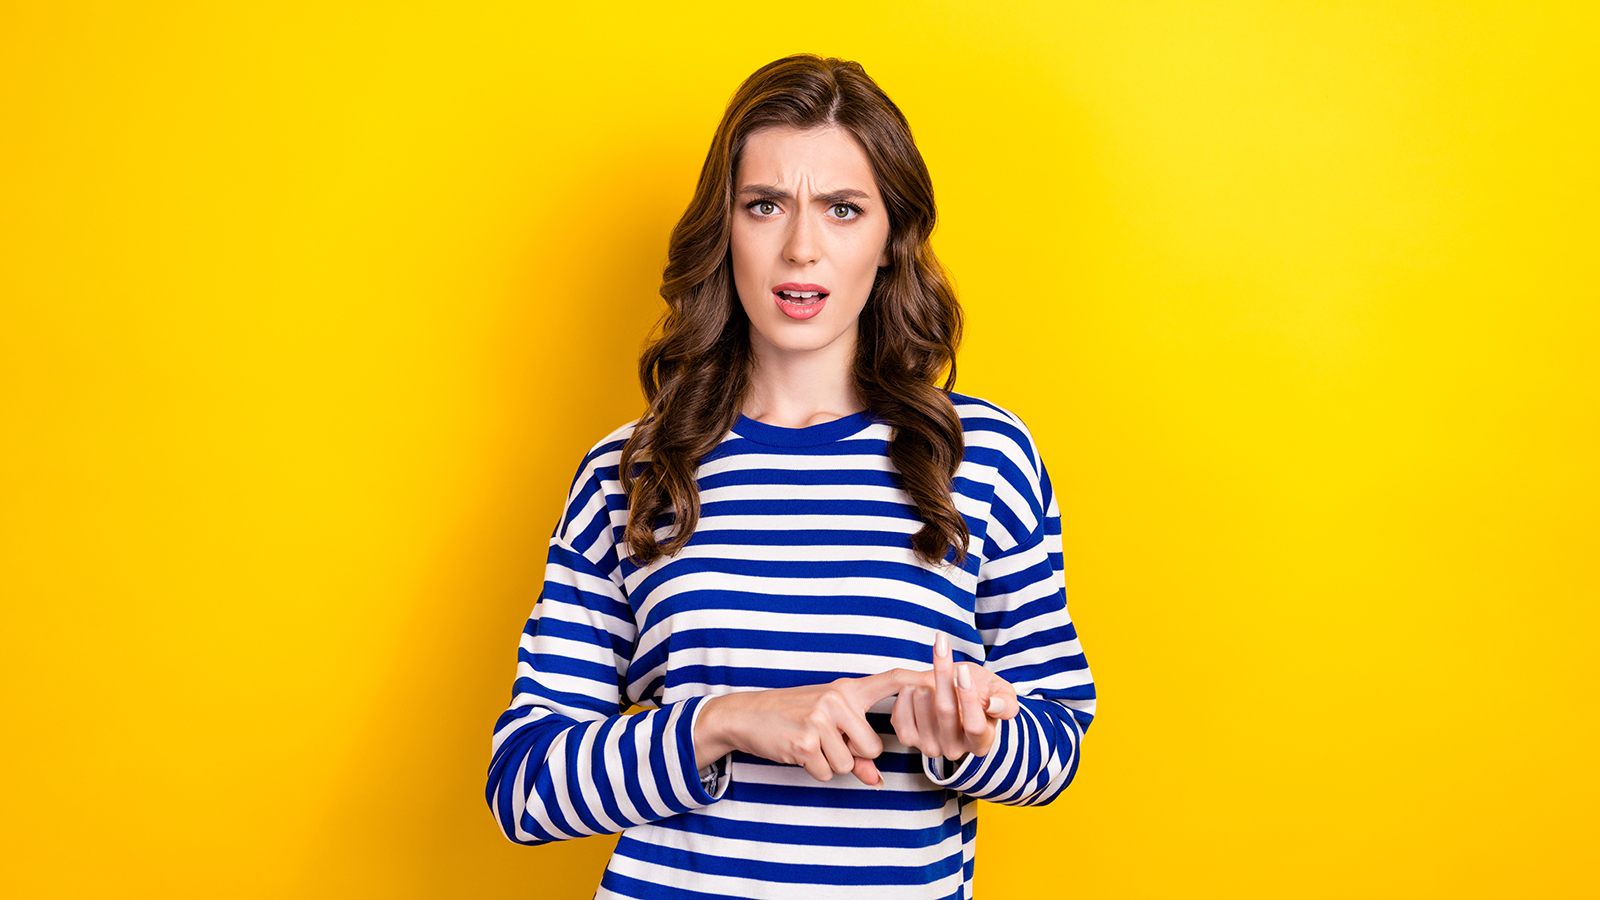 Photo portrait of attractive young woman calculate fingers scold annoyed dressed stylish striped look isolated on yellow color background